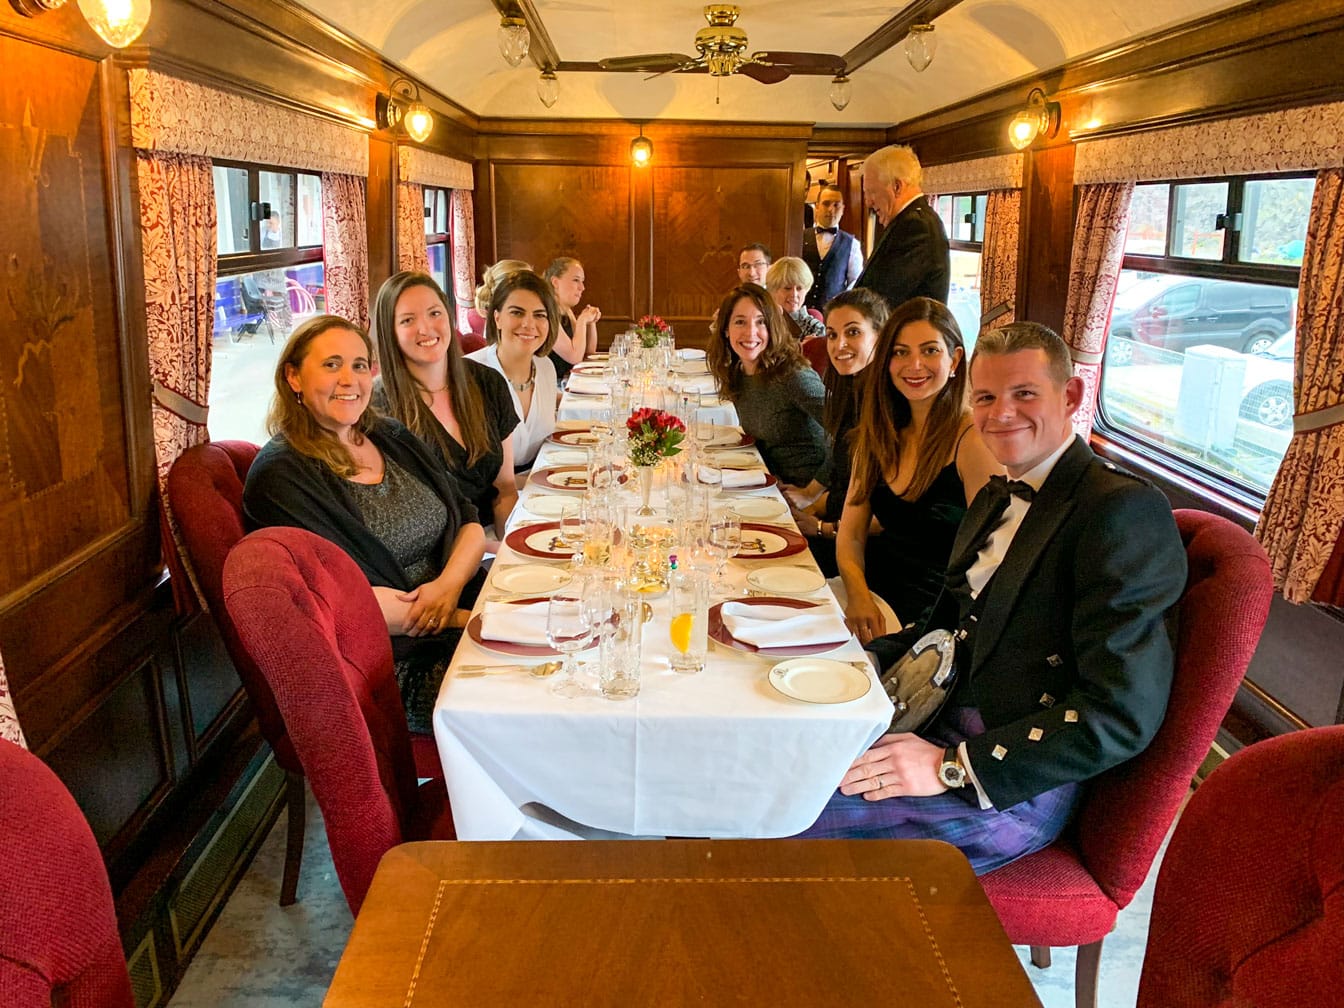 2021 Departures Now Available on Venice Simplon-Orient-Express, Belmond  Royal Scotsman, more - Society of International Railway Travelers